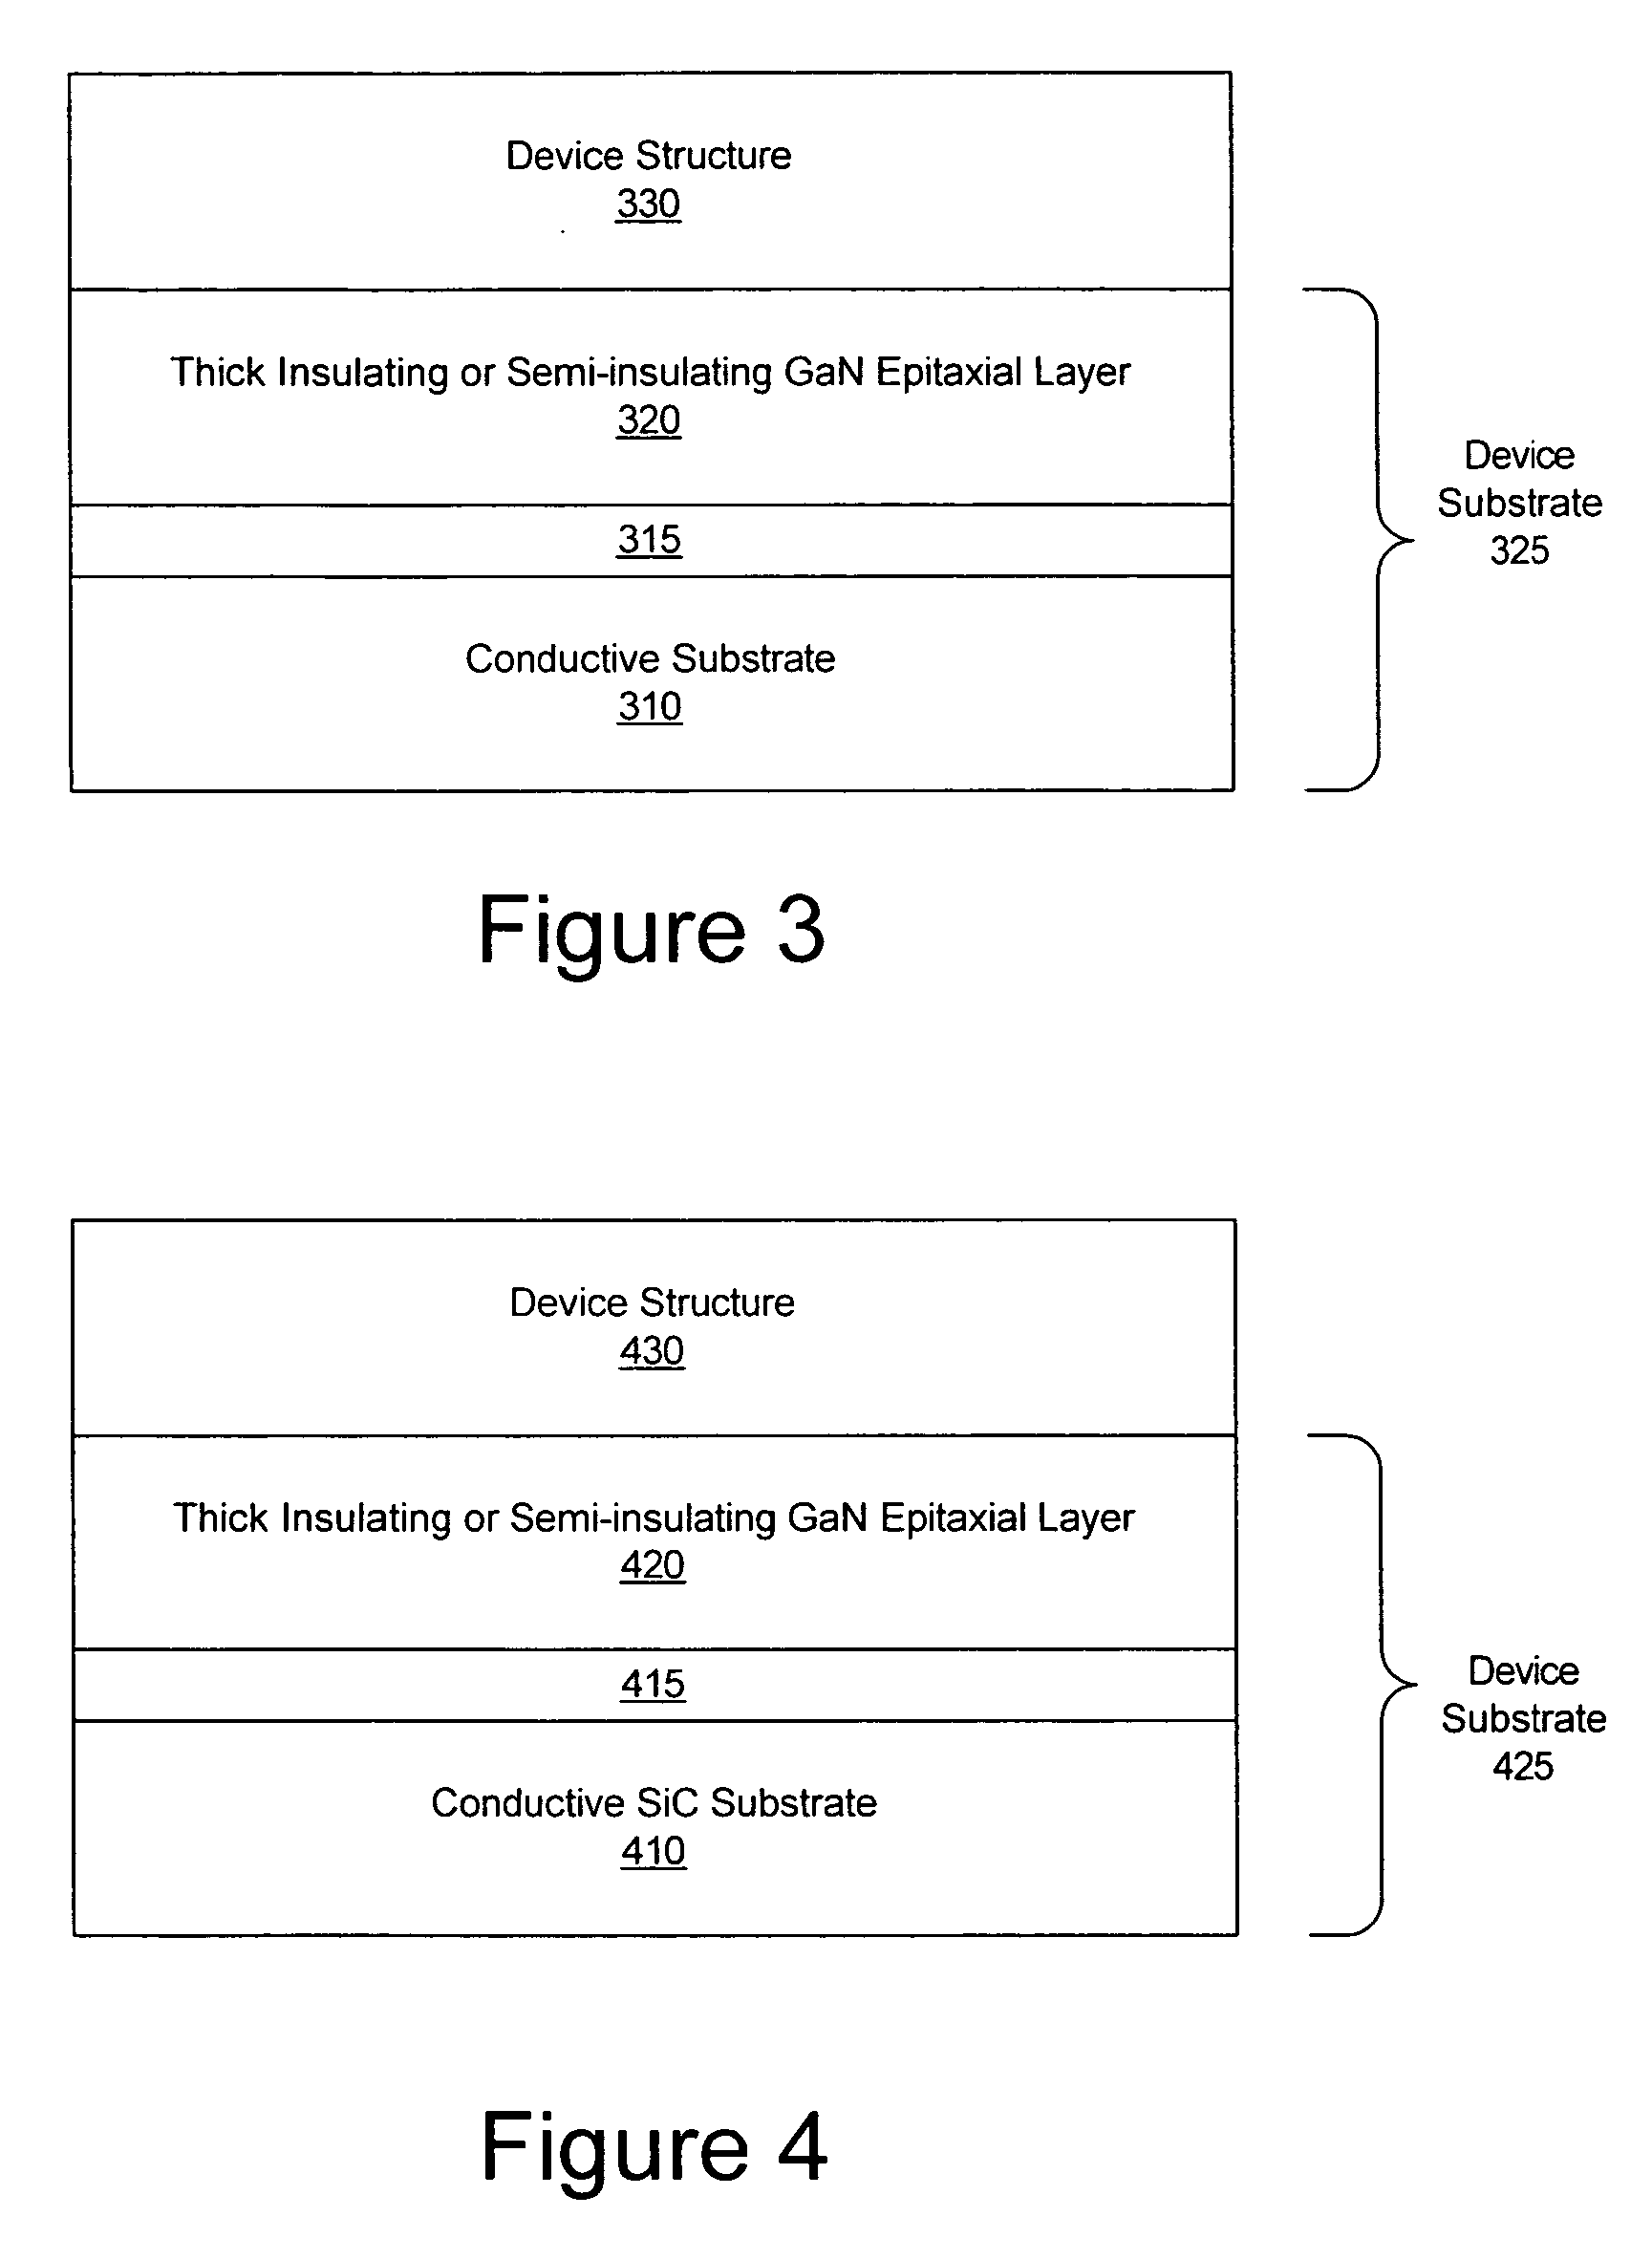 Thick semi-insulating or insulating epitaxial gallium nitride layers and devices incorporating same